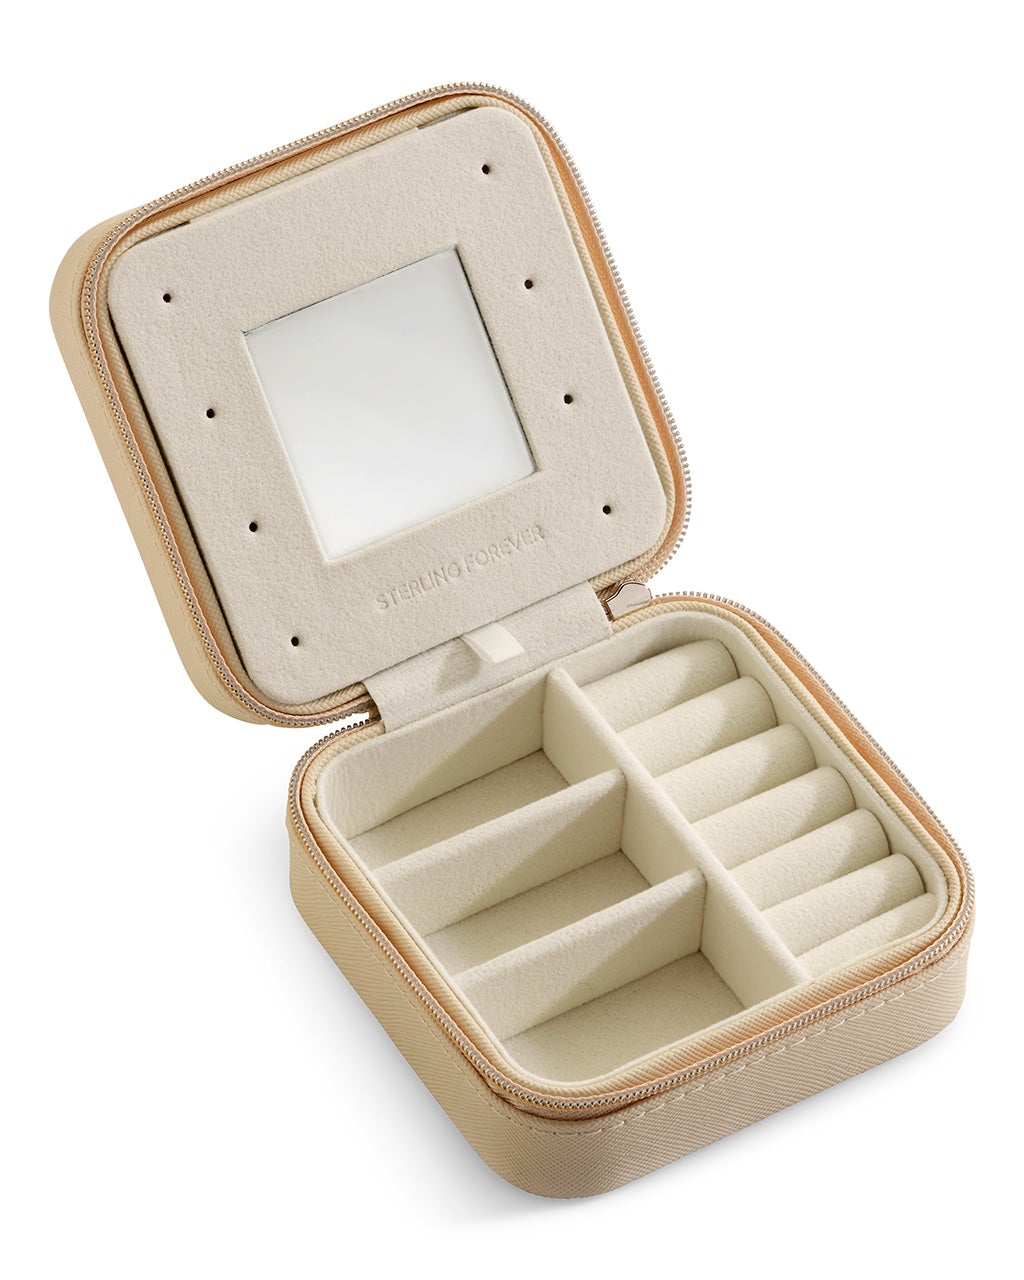 Jewelry Travel Case by Sterling Forever